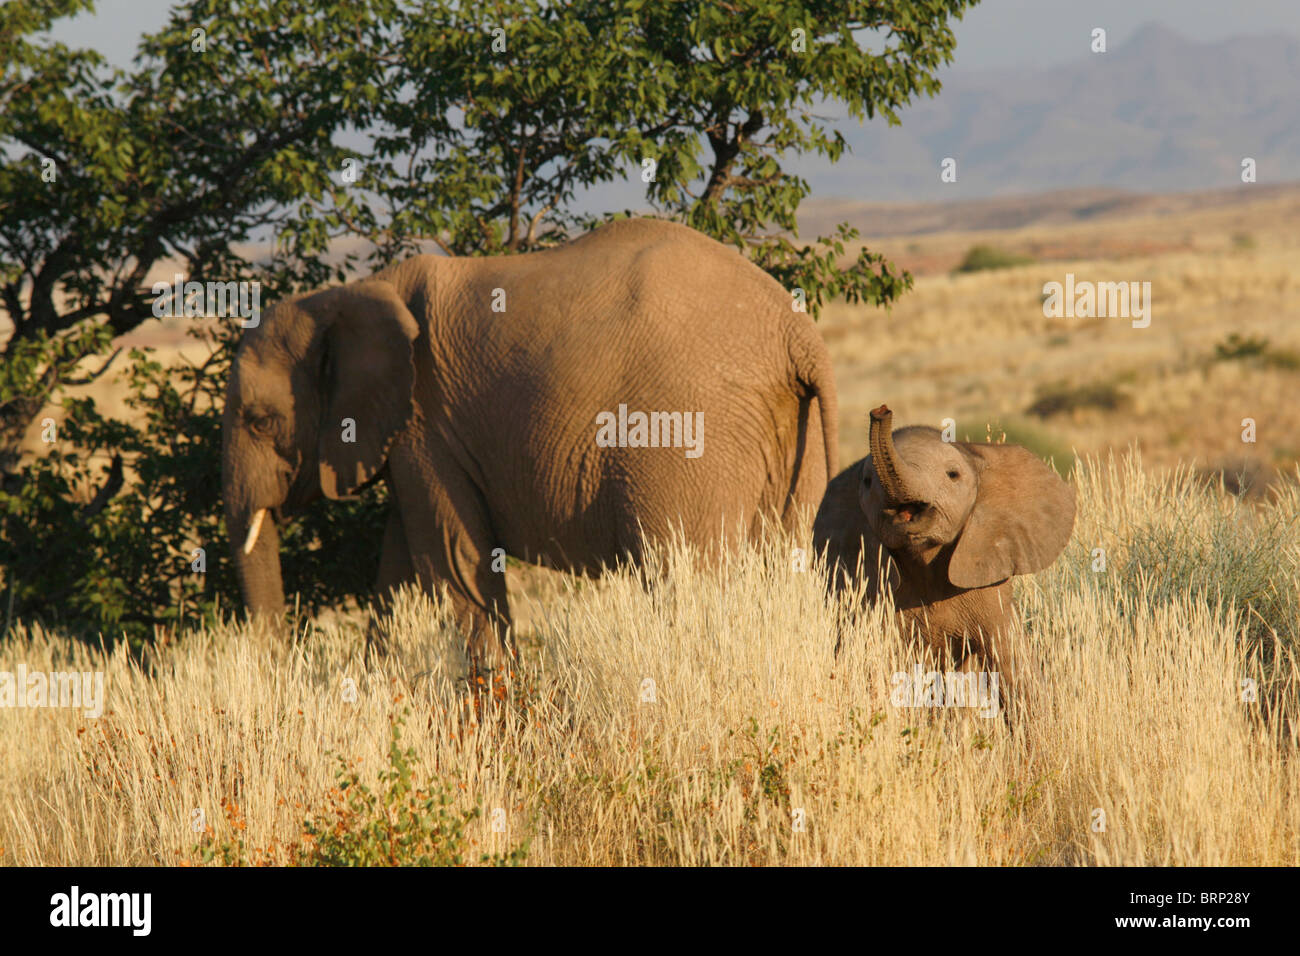 Elephant mother and young calf with raised trunk Stock Photo